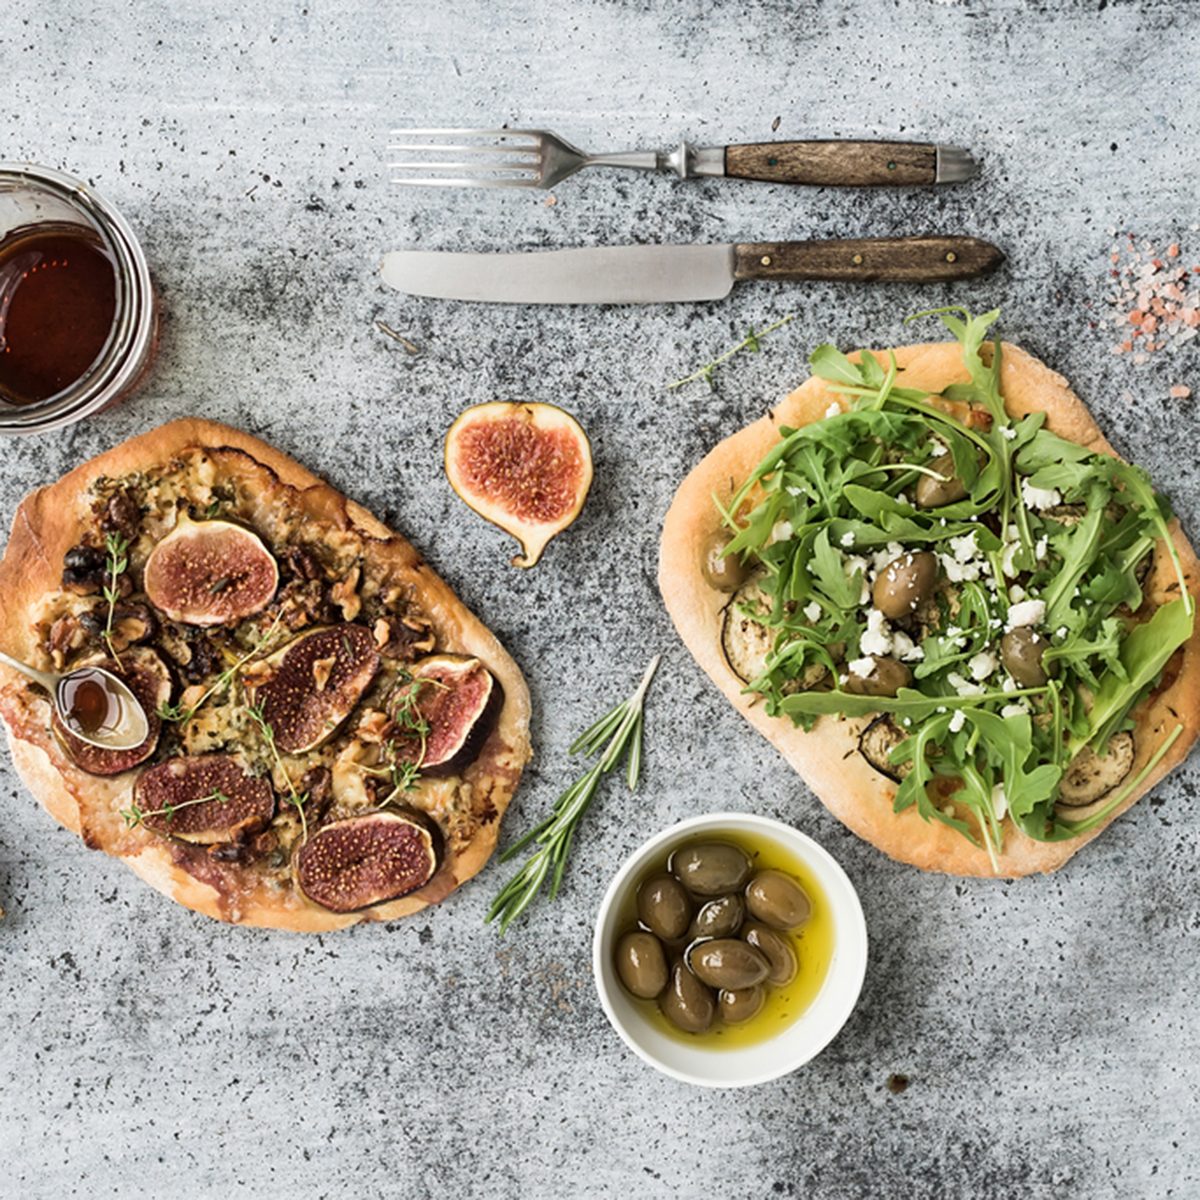 Rustic homemade pizzas with eggpant, cheese, olives, arugula, prosciutto and figs over grunge backdrop.